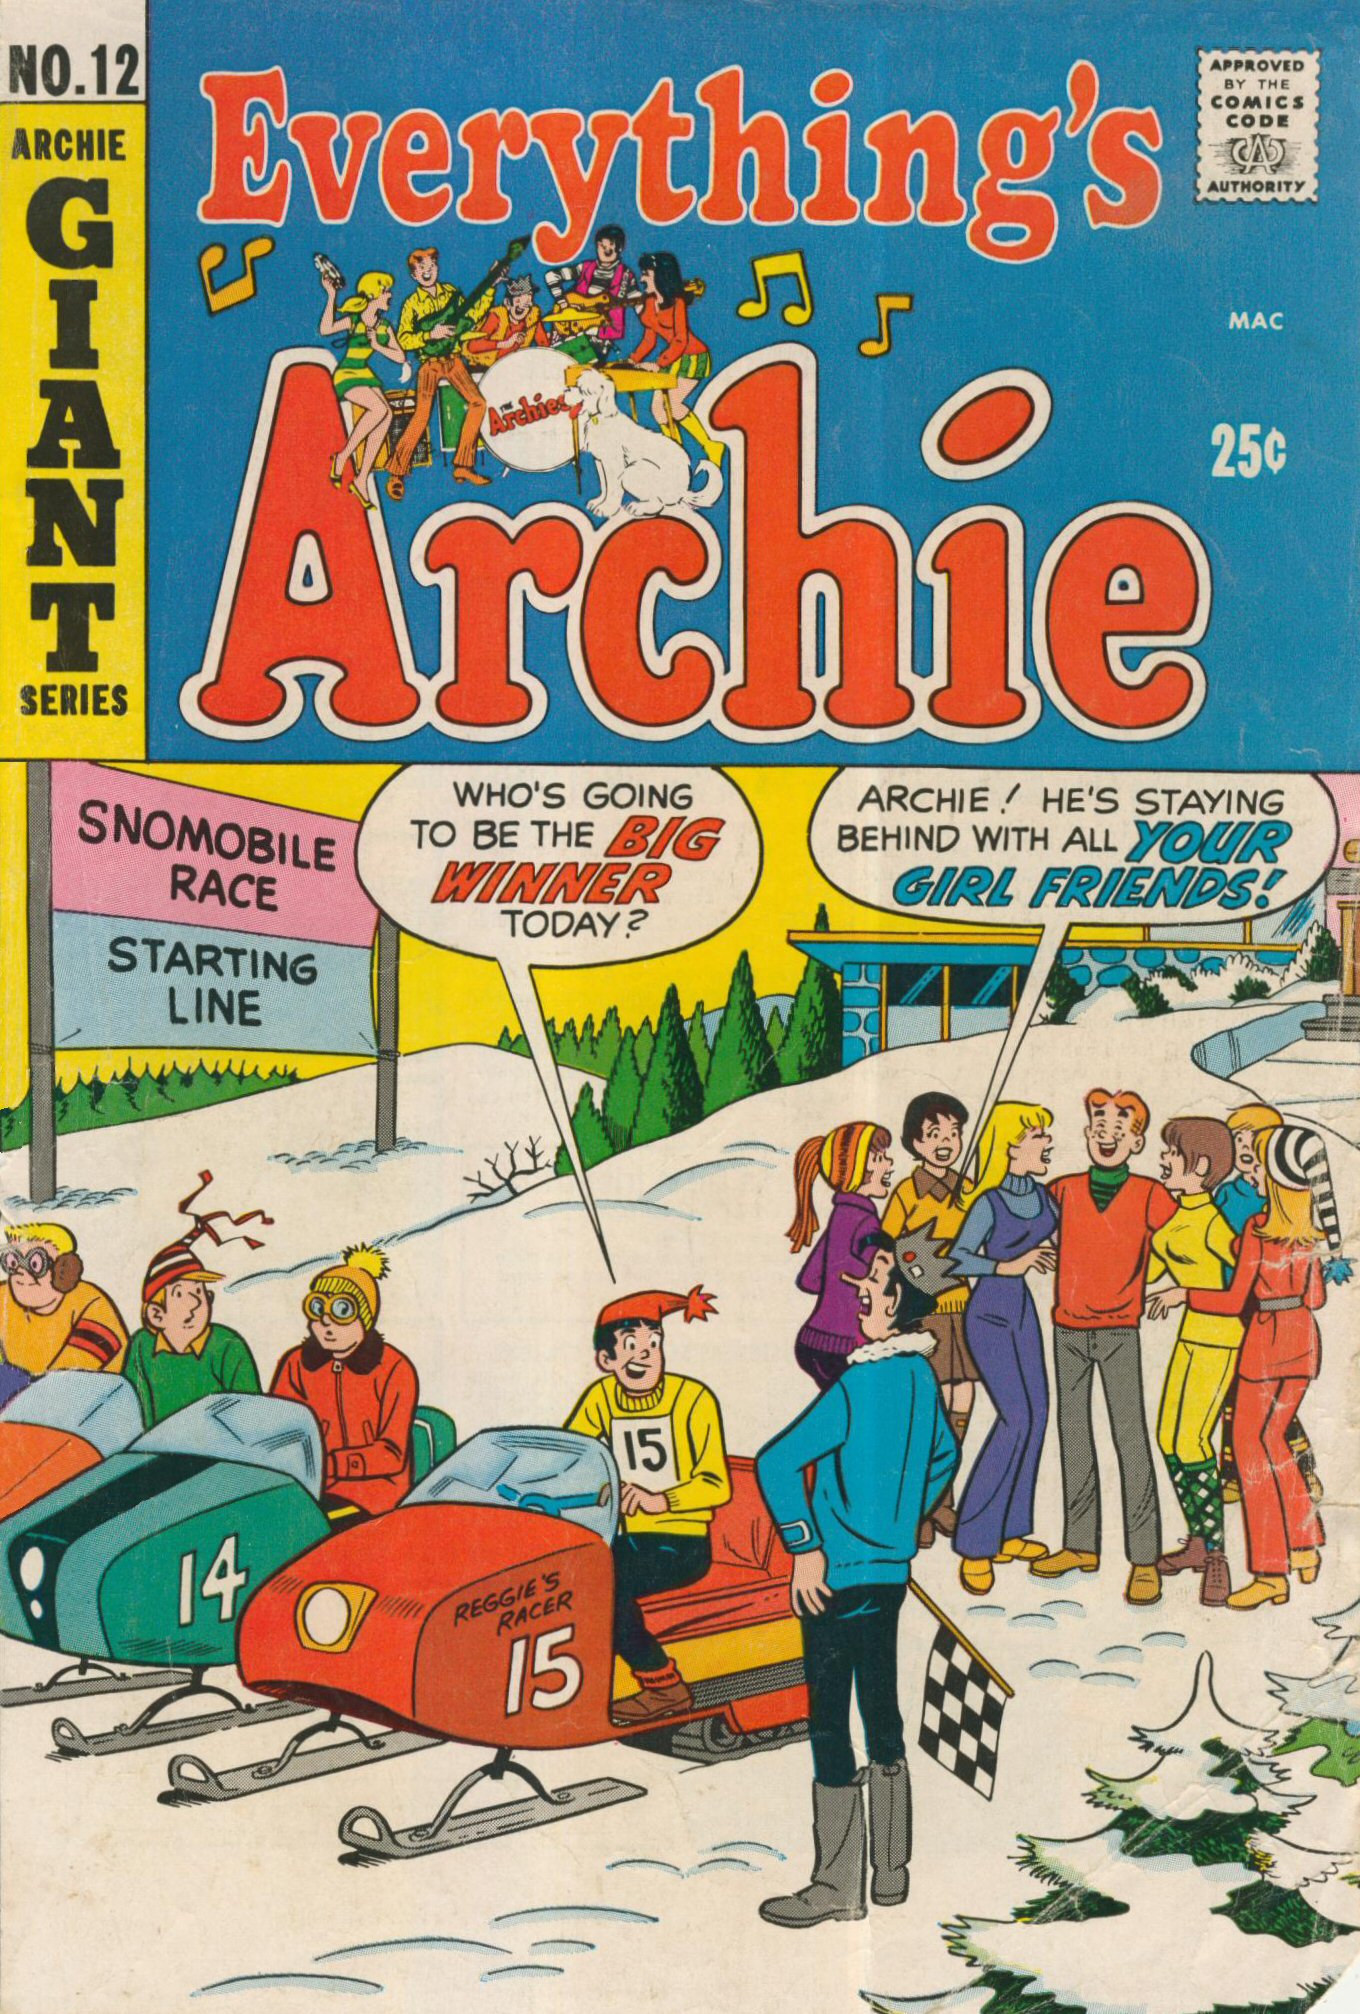 Read online Everything's Archie comic -  Issue #12 - 1